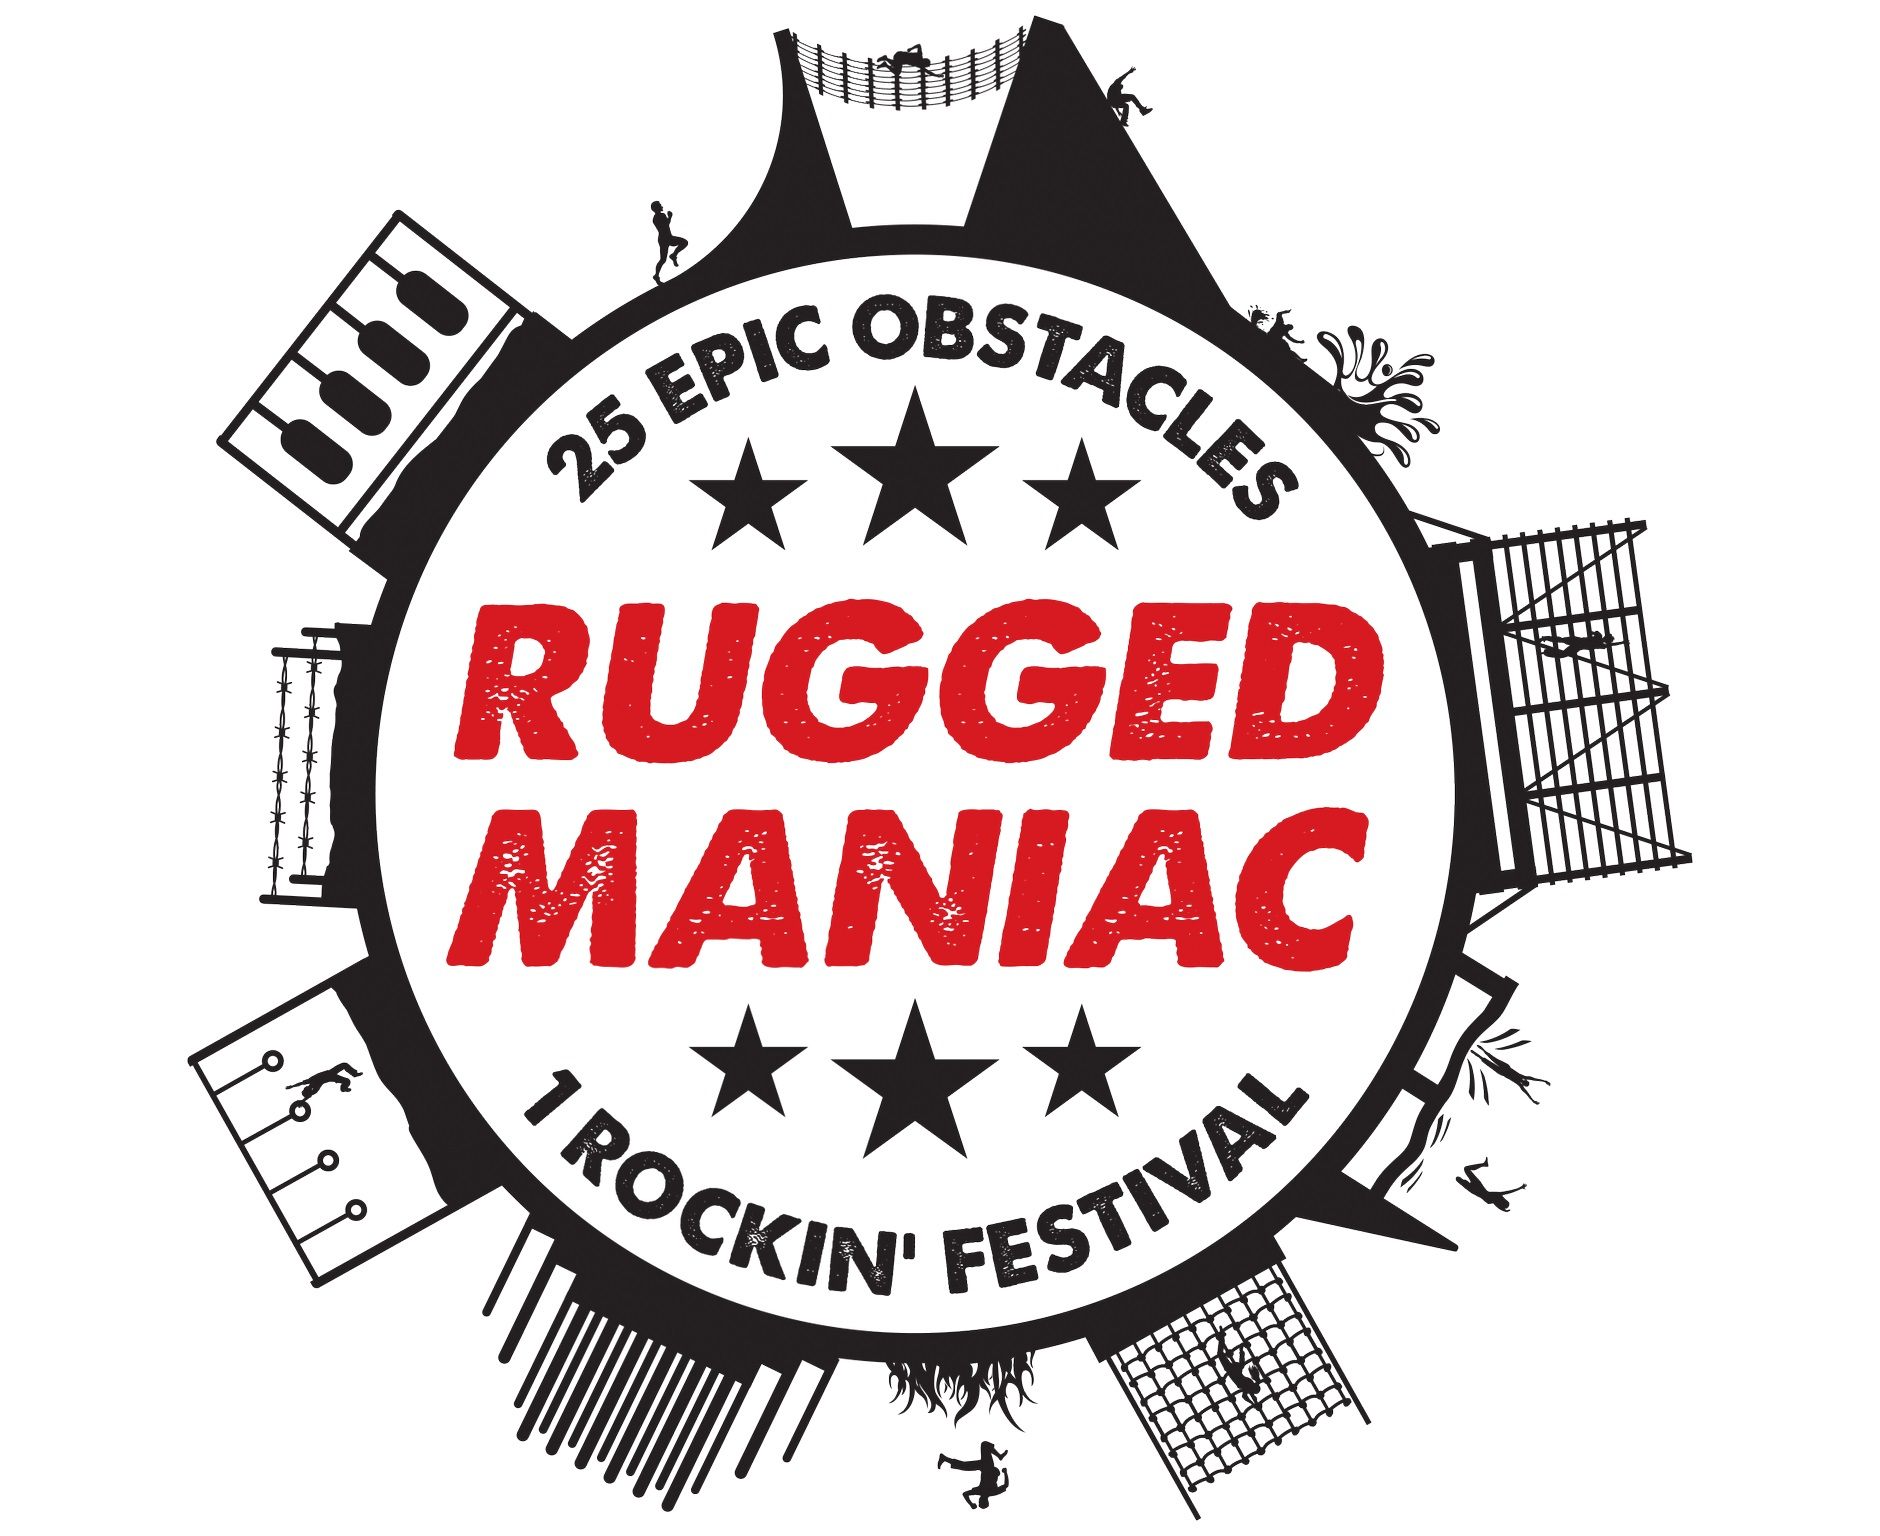 11-astounding-facts-about-rugged-maniac